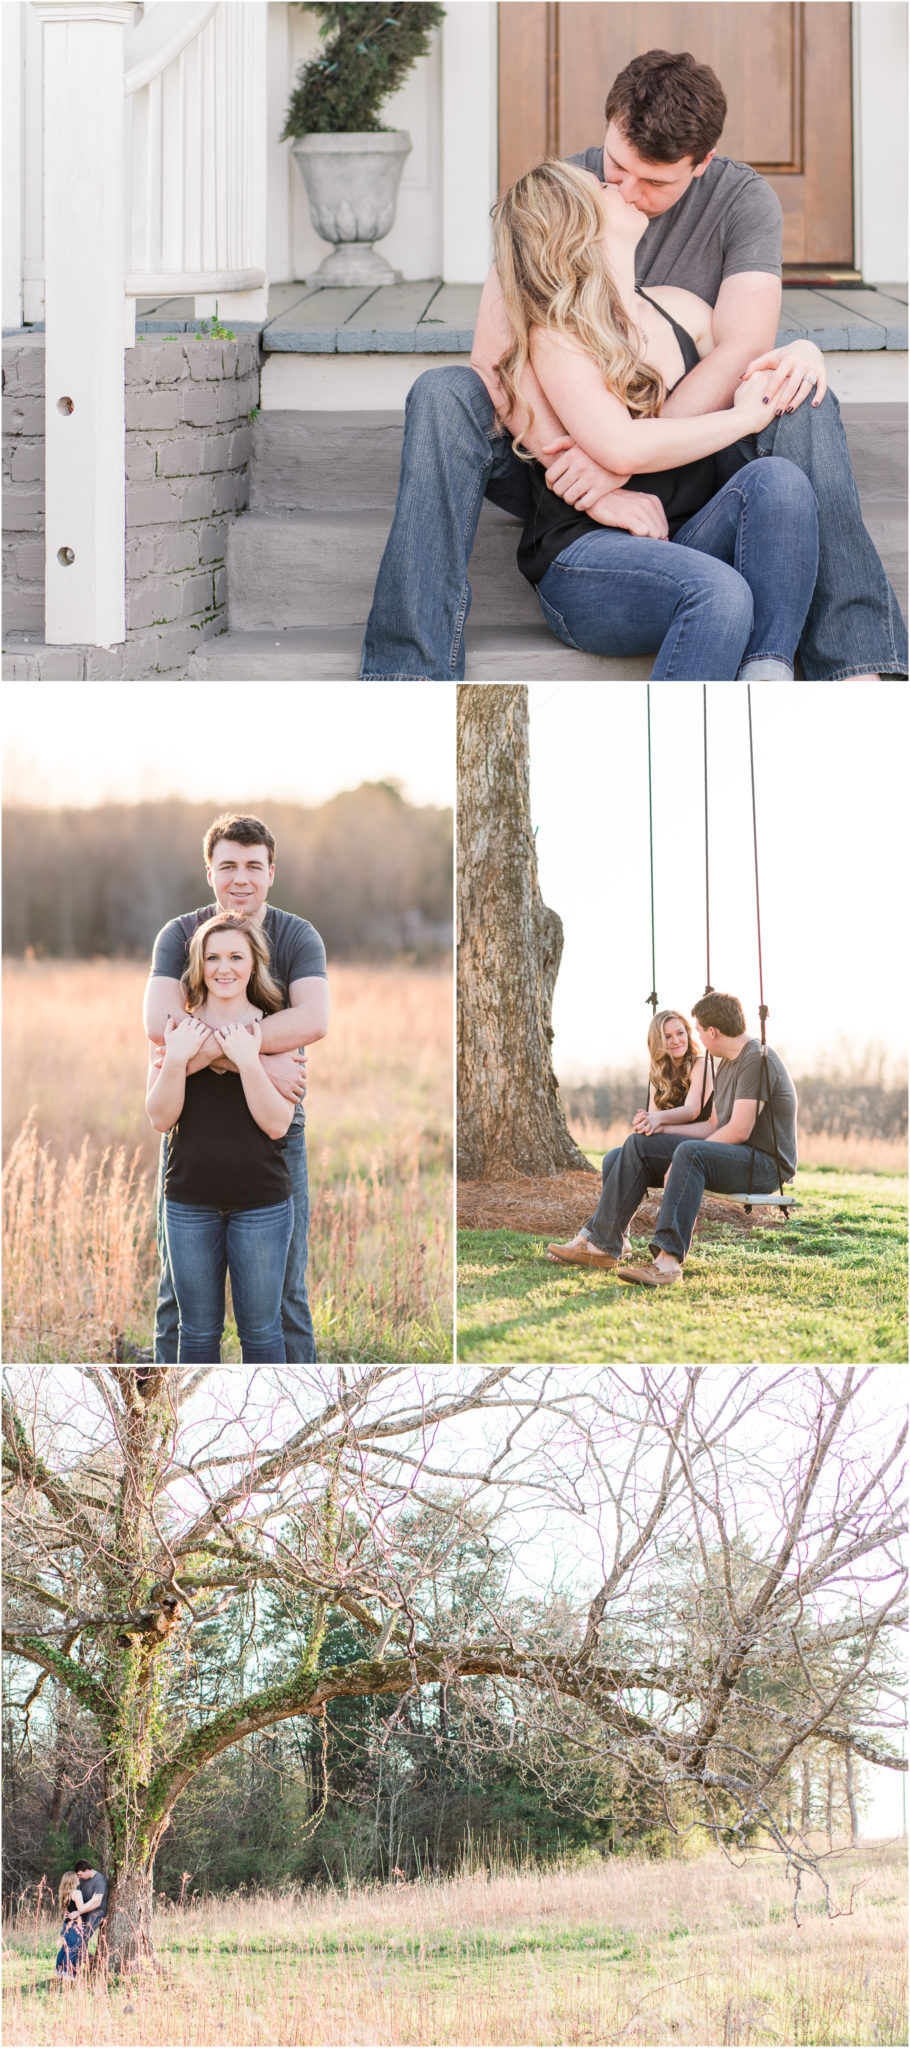 An Ellery Farms Engagement Session in Woodruff, SC.